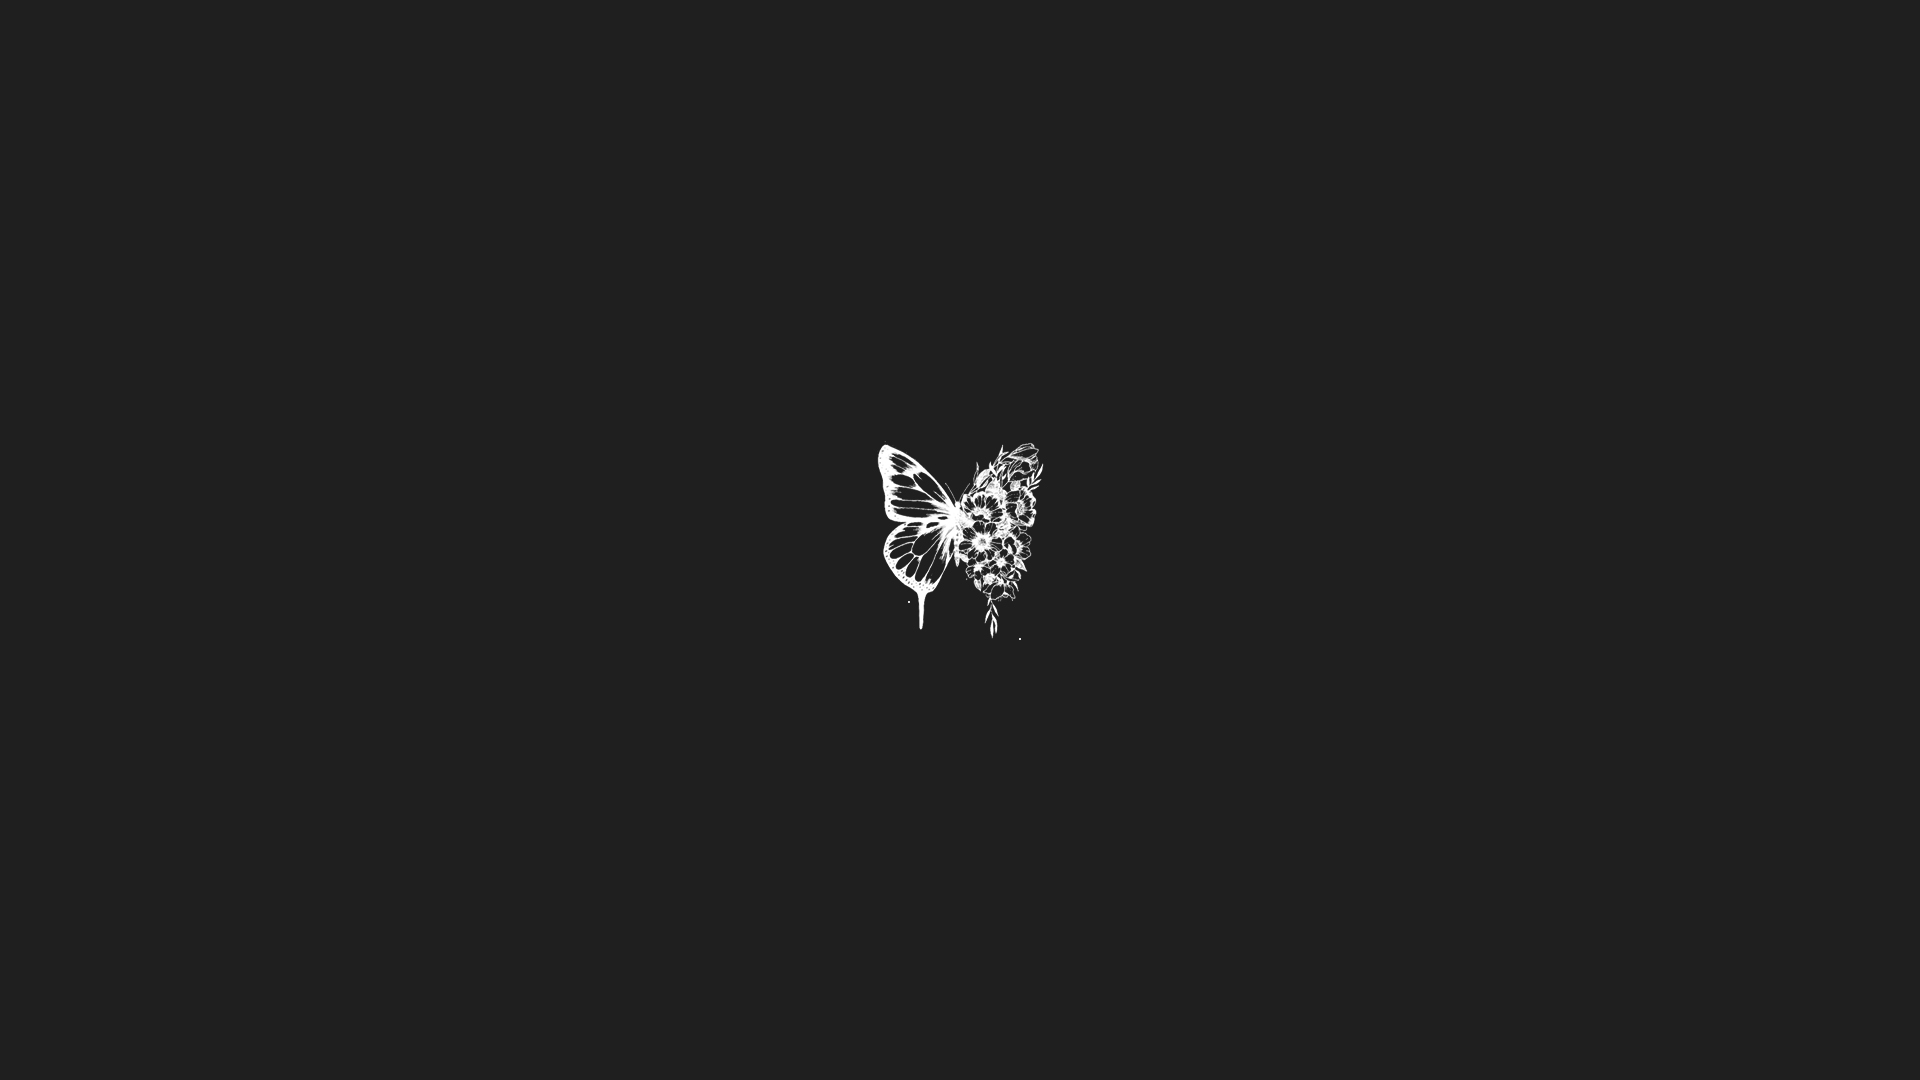 General 1920x1080 minimalism butterfly monochrome flowers plants black background digital art drawing dark leaves wings butterfly wings nature simple background insect